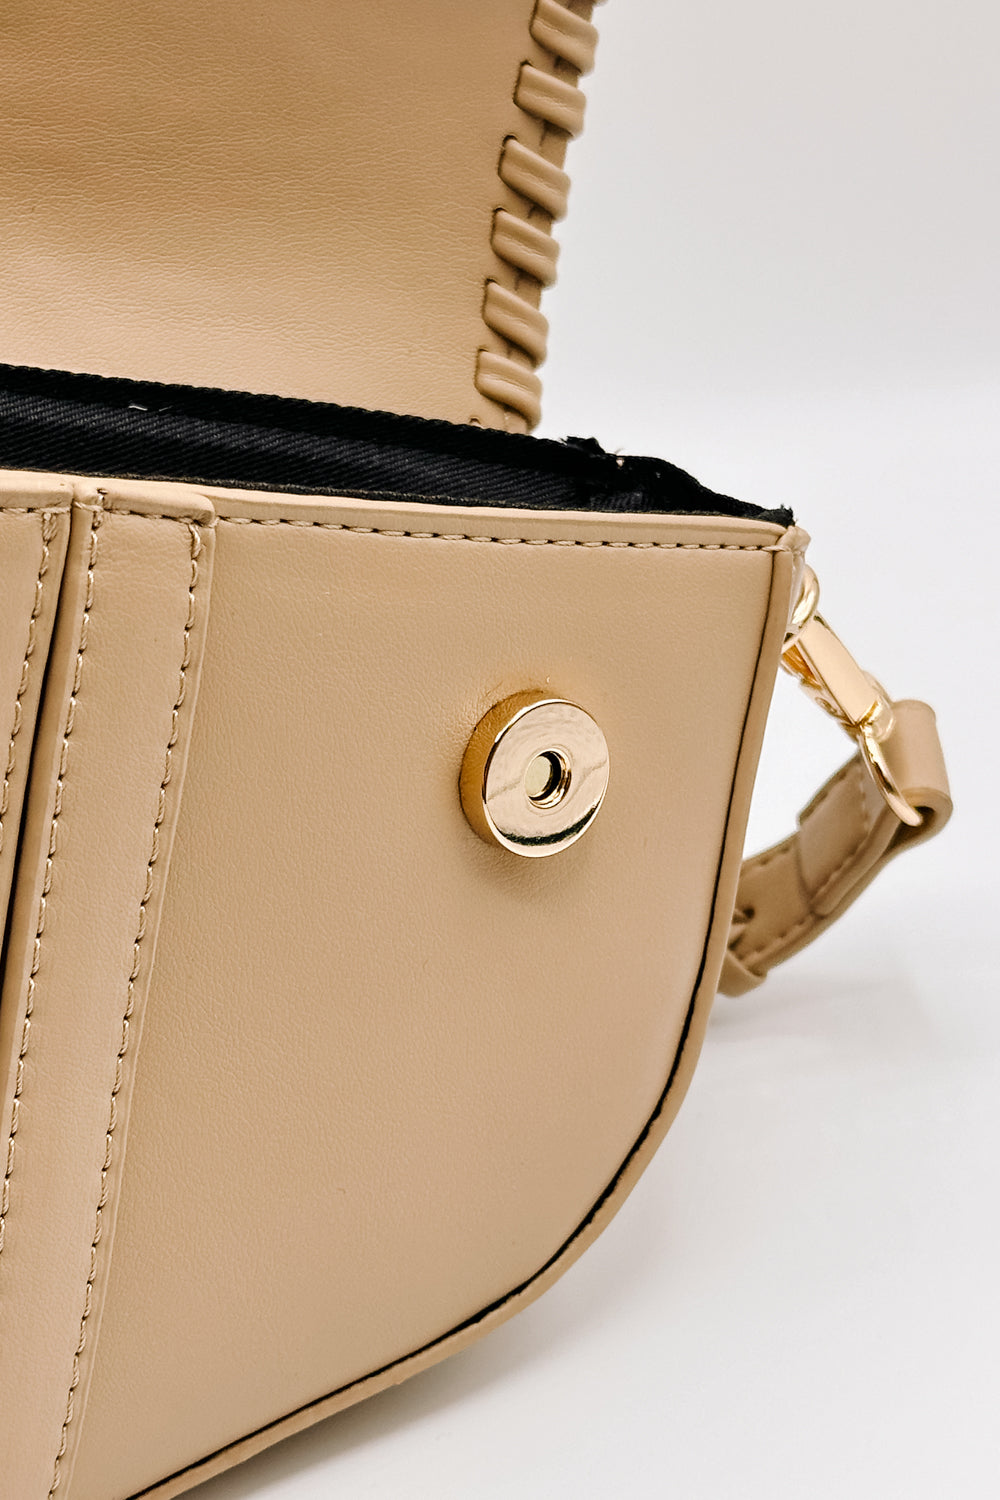 close up  view of the Sloane Sand Leather Braided Strap Purse which features tan leather fabric, braided details, gold clasp closure, braided strap, tan lining and curvy hem shape